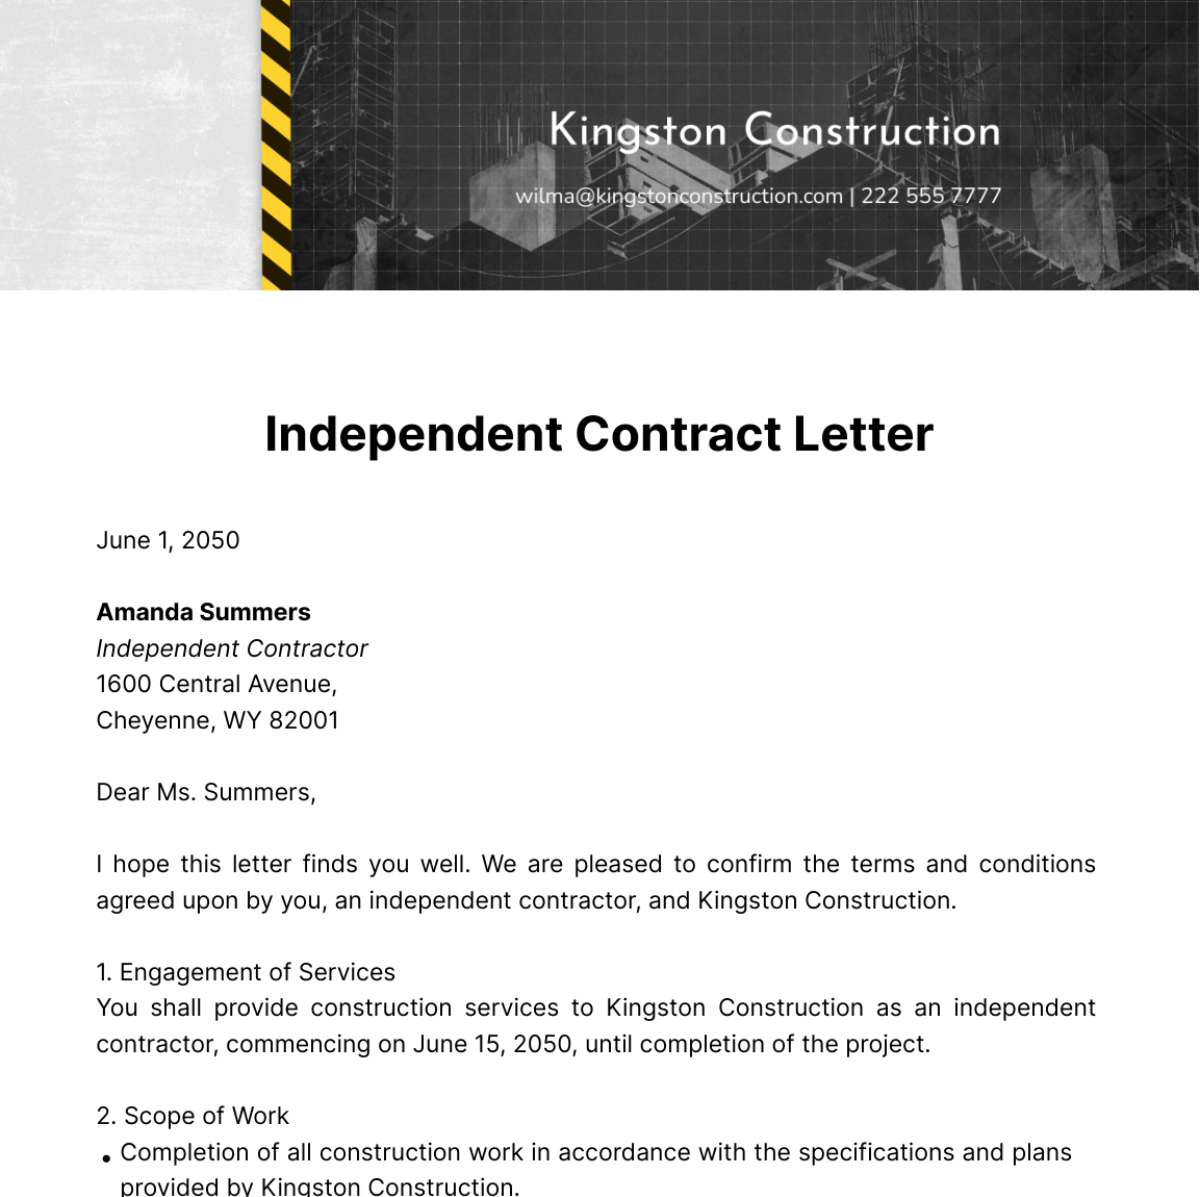 Independent Contract Letter   Template